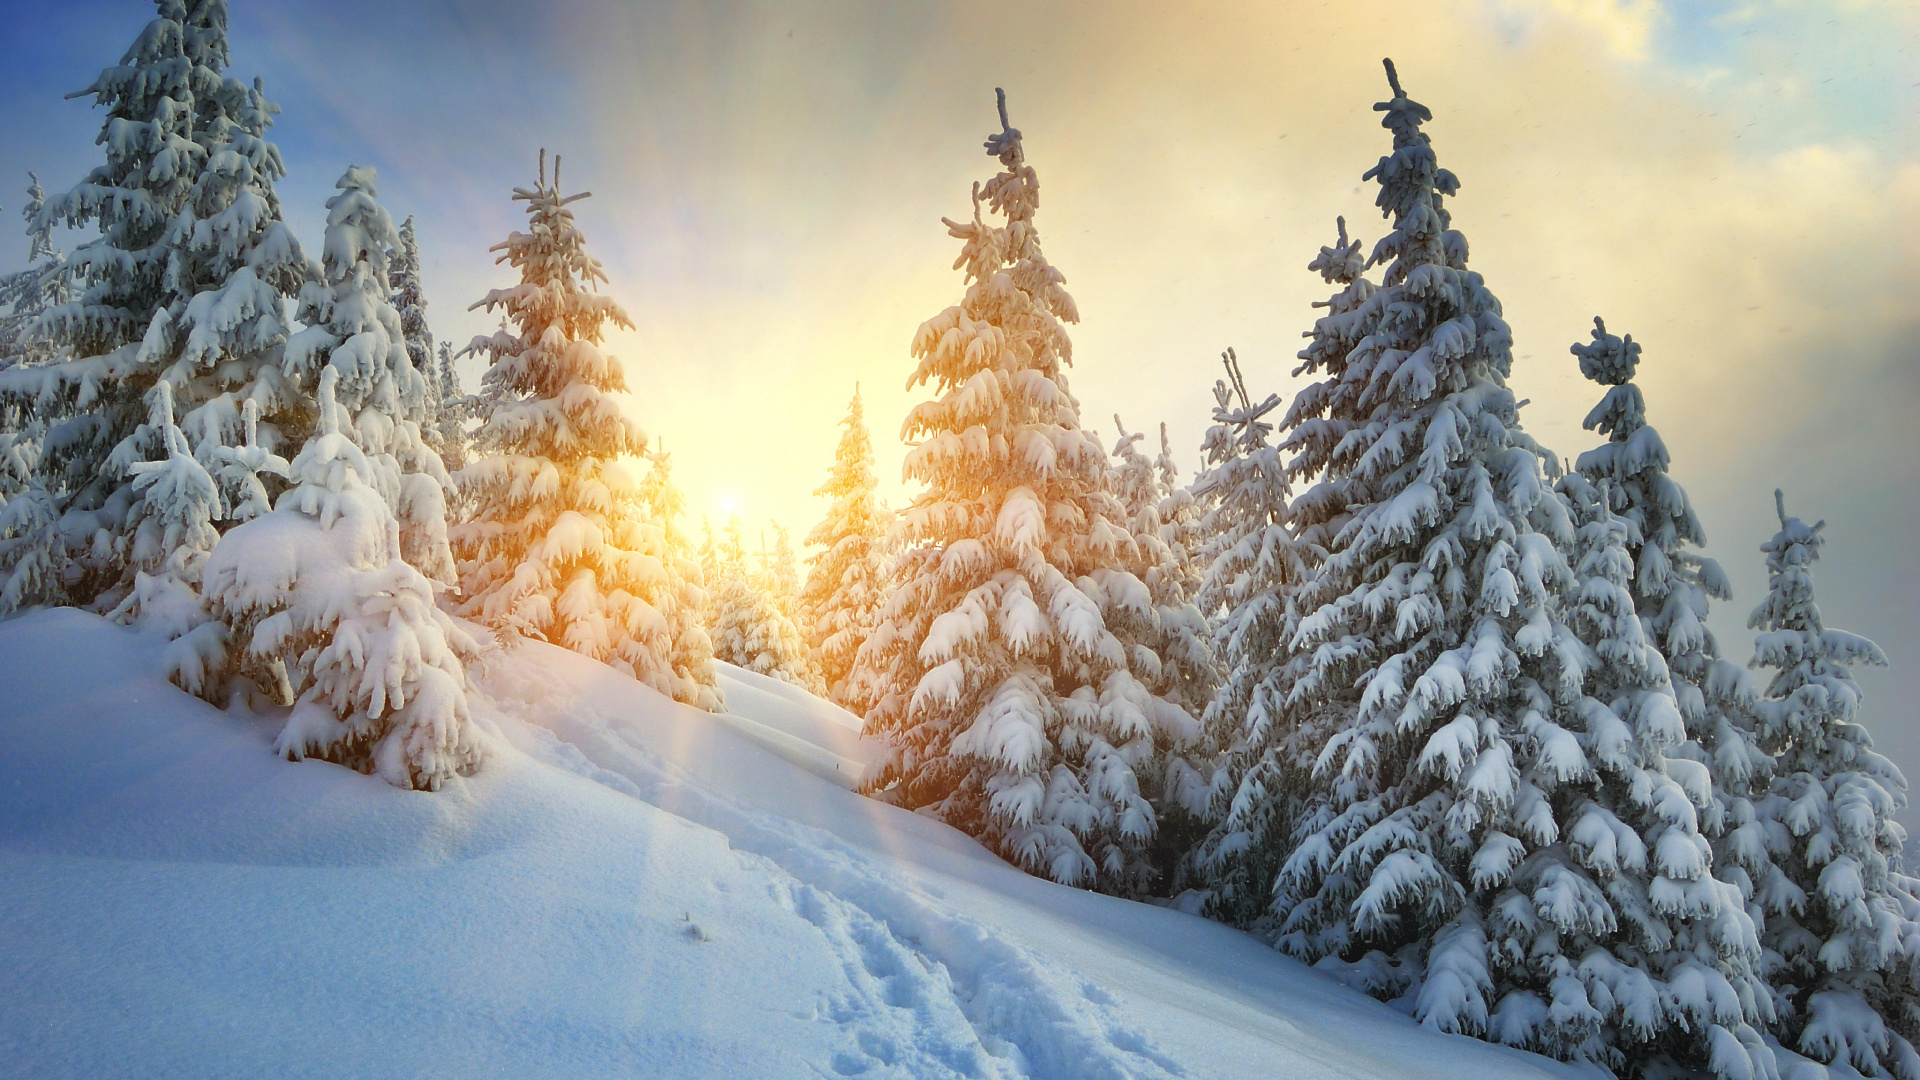 Snow Covered Pine Trees During Daytime. Wallpaper in 1920x1080 Resolution